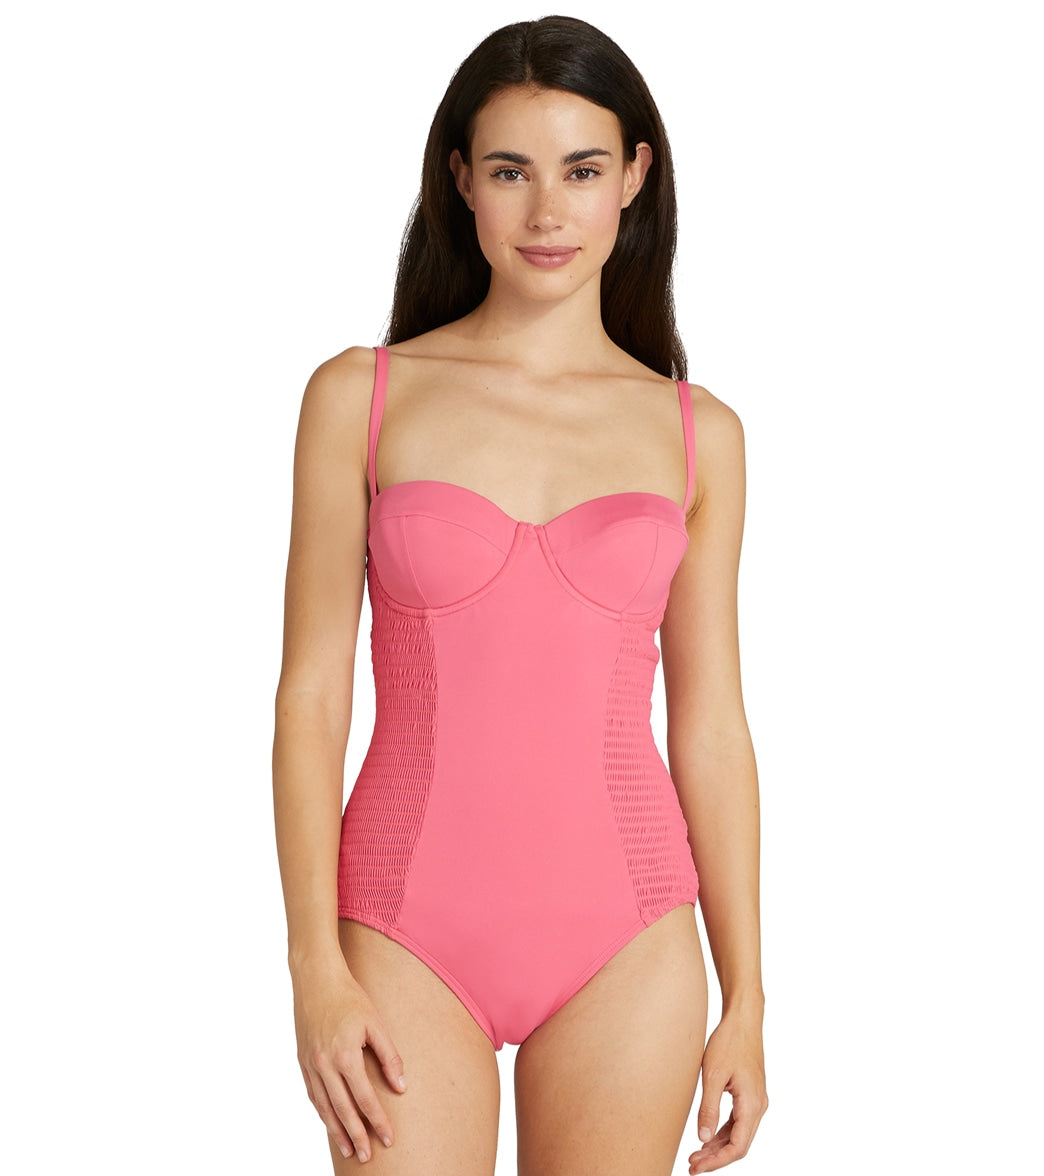 Kate Spade New York Womens Solids Smocked Underwire One Piece Swimsuit